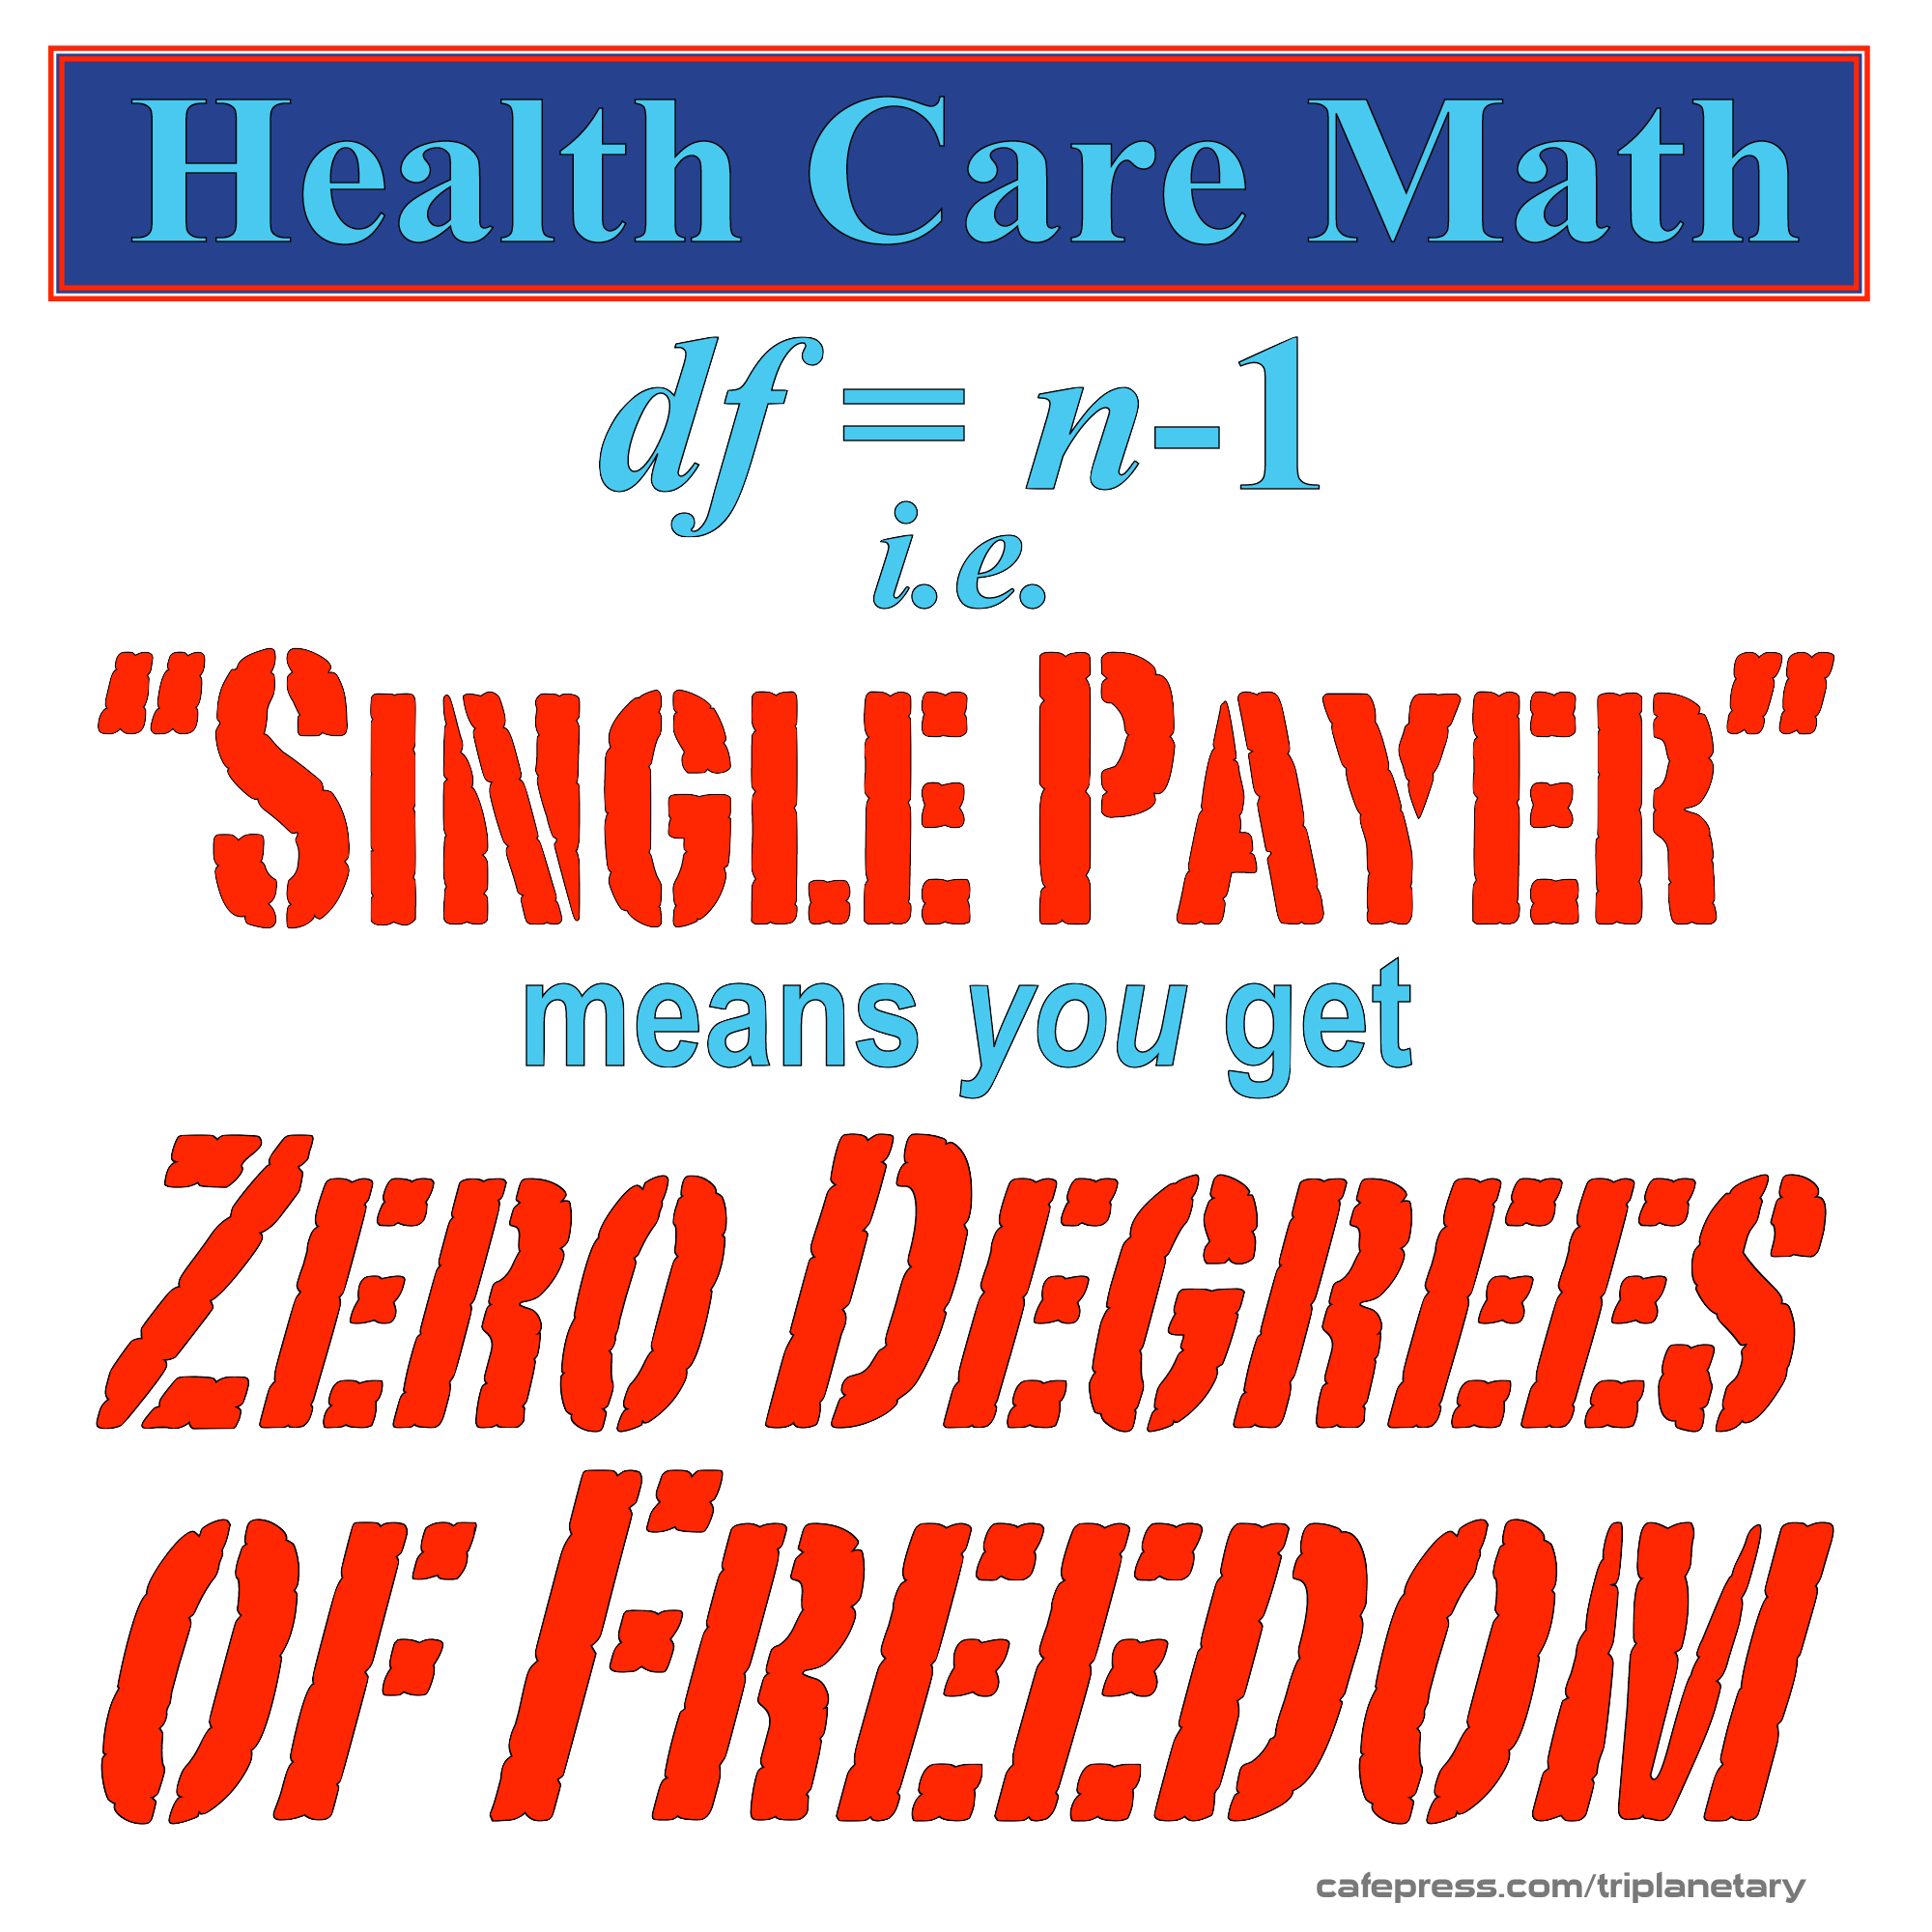 Red, blue, and white image reading 'Health Care Math: Single Payer = Zero Degrees of Freedom'